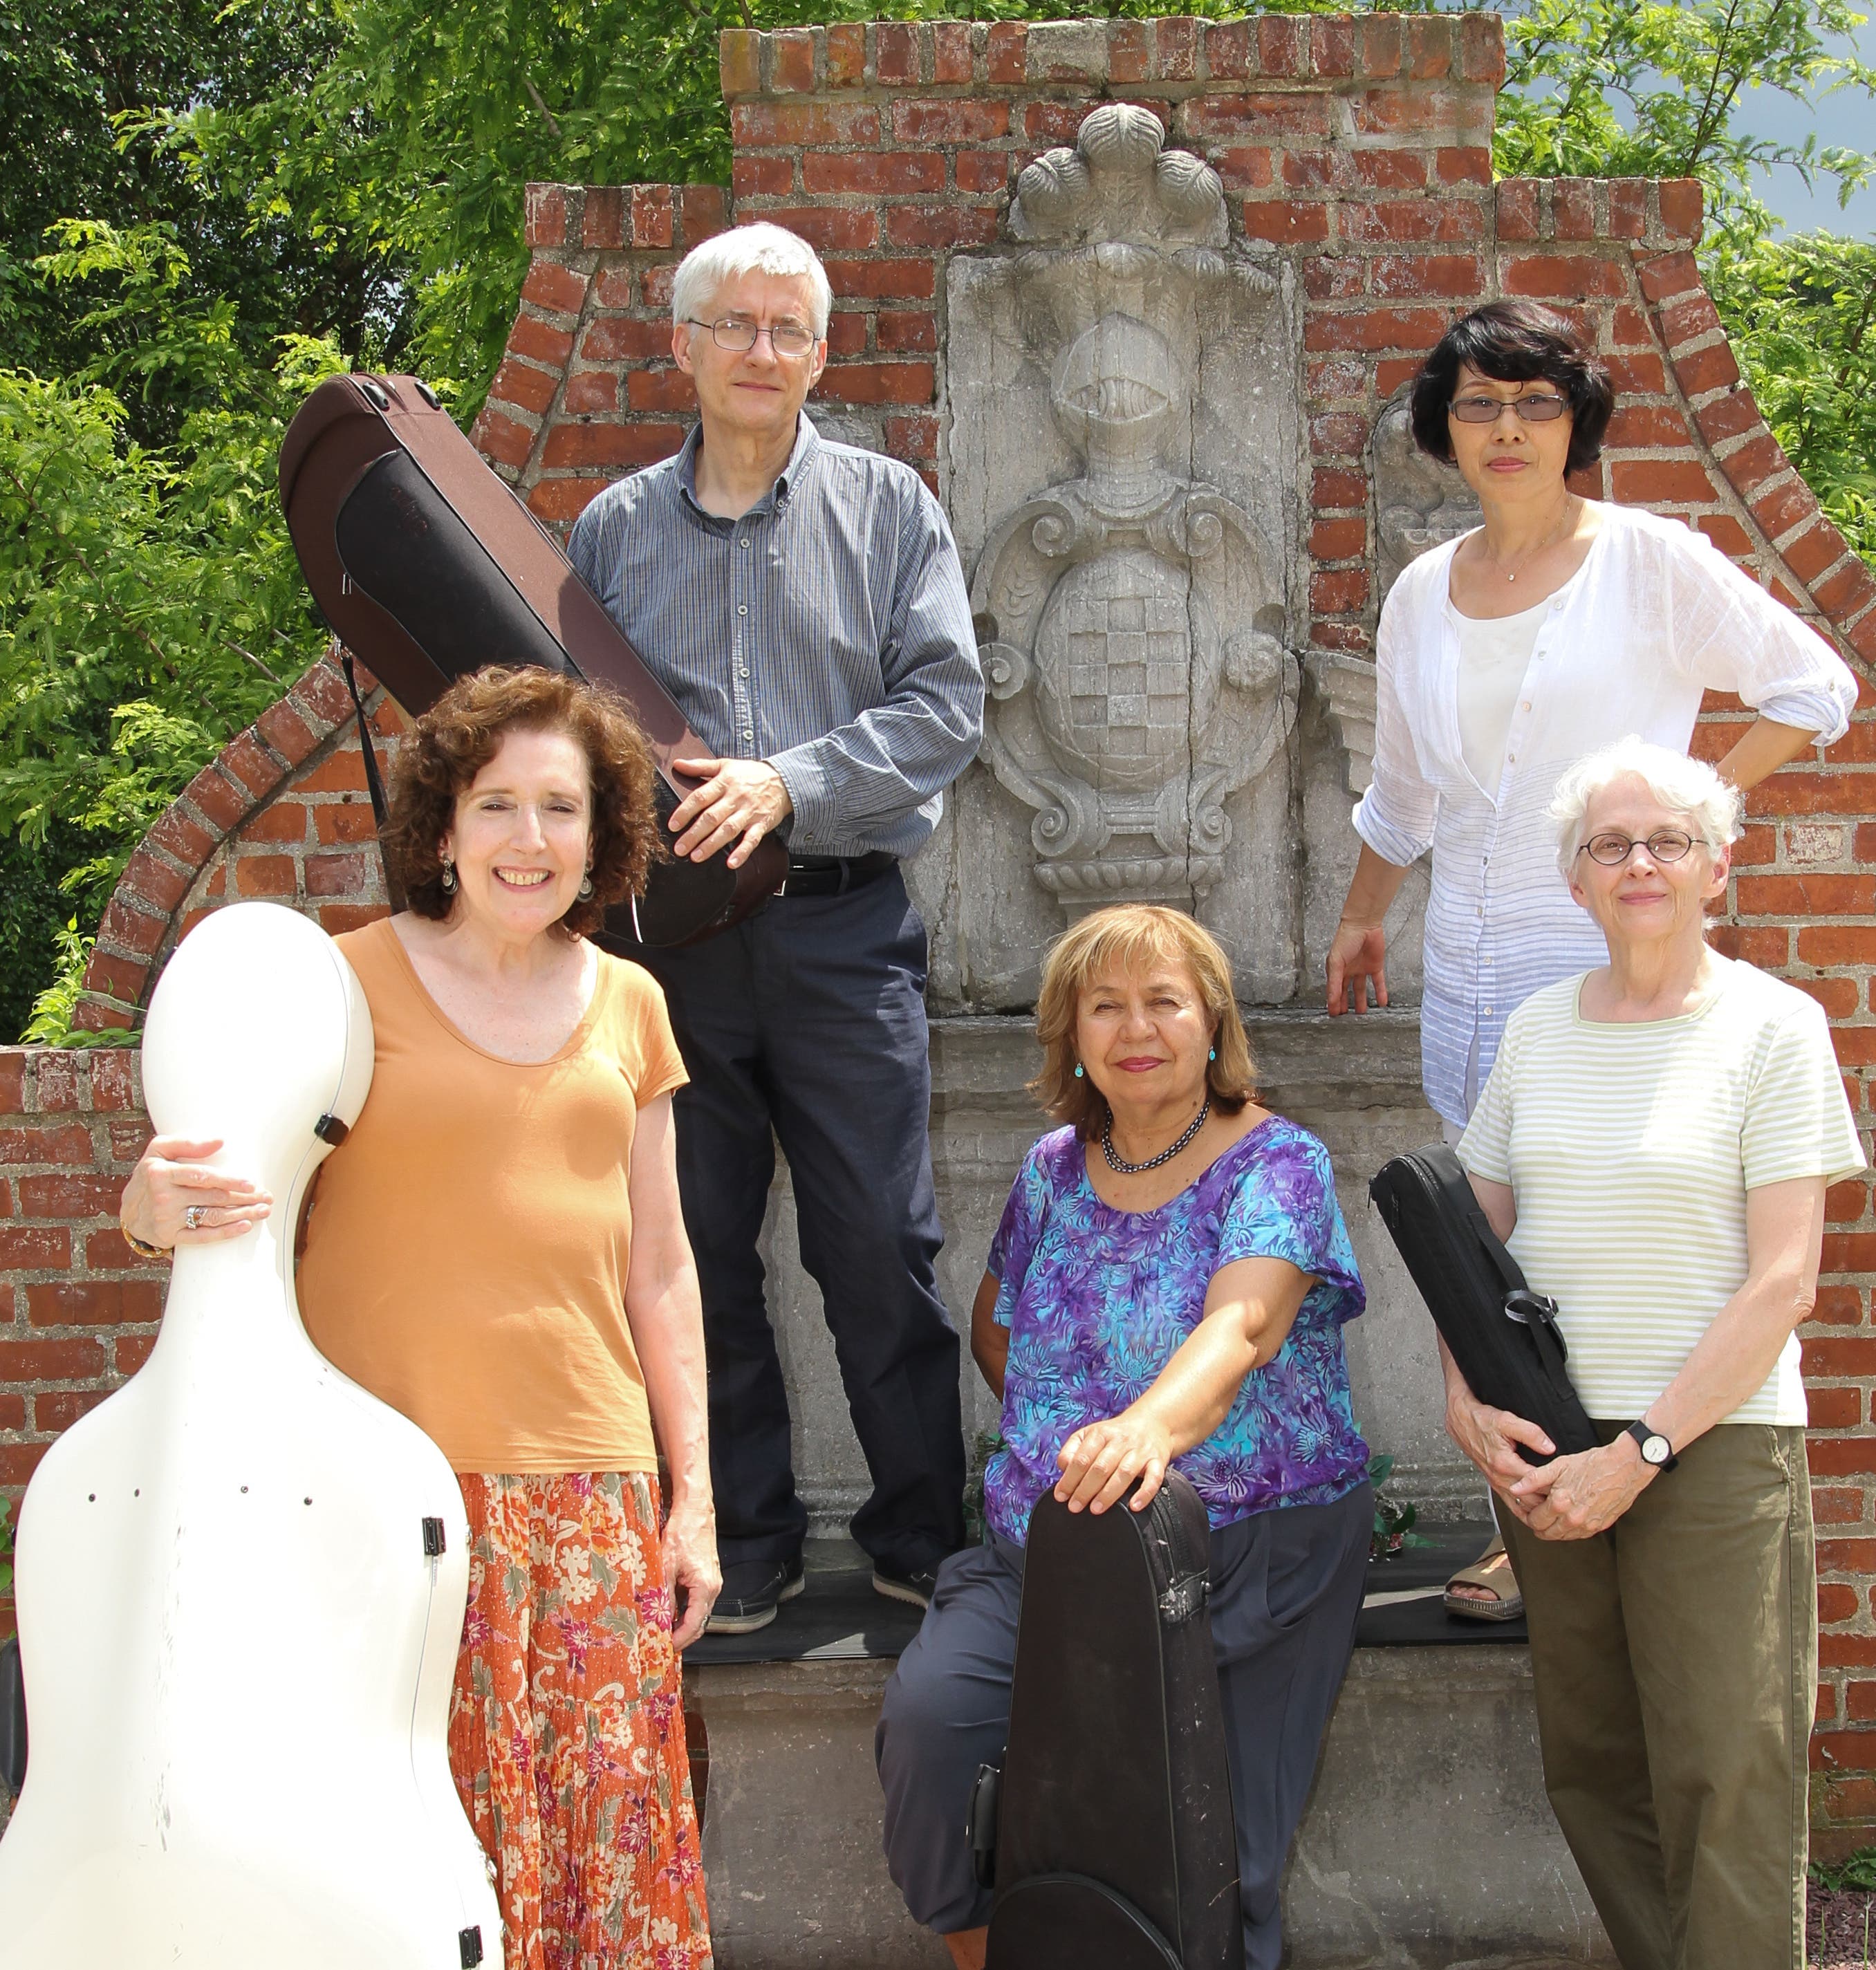 Festival Concert Series featuring The Pierrot Consort